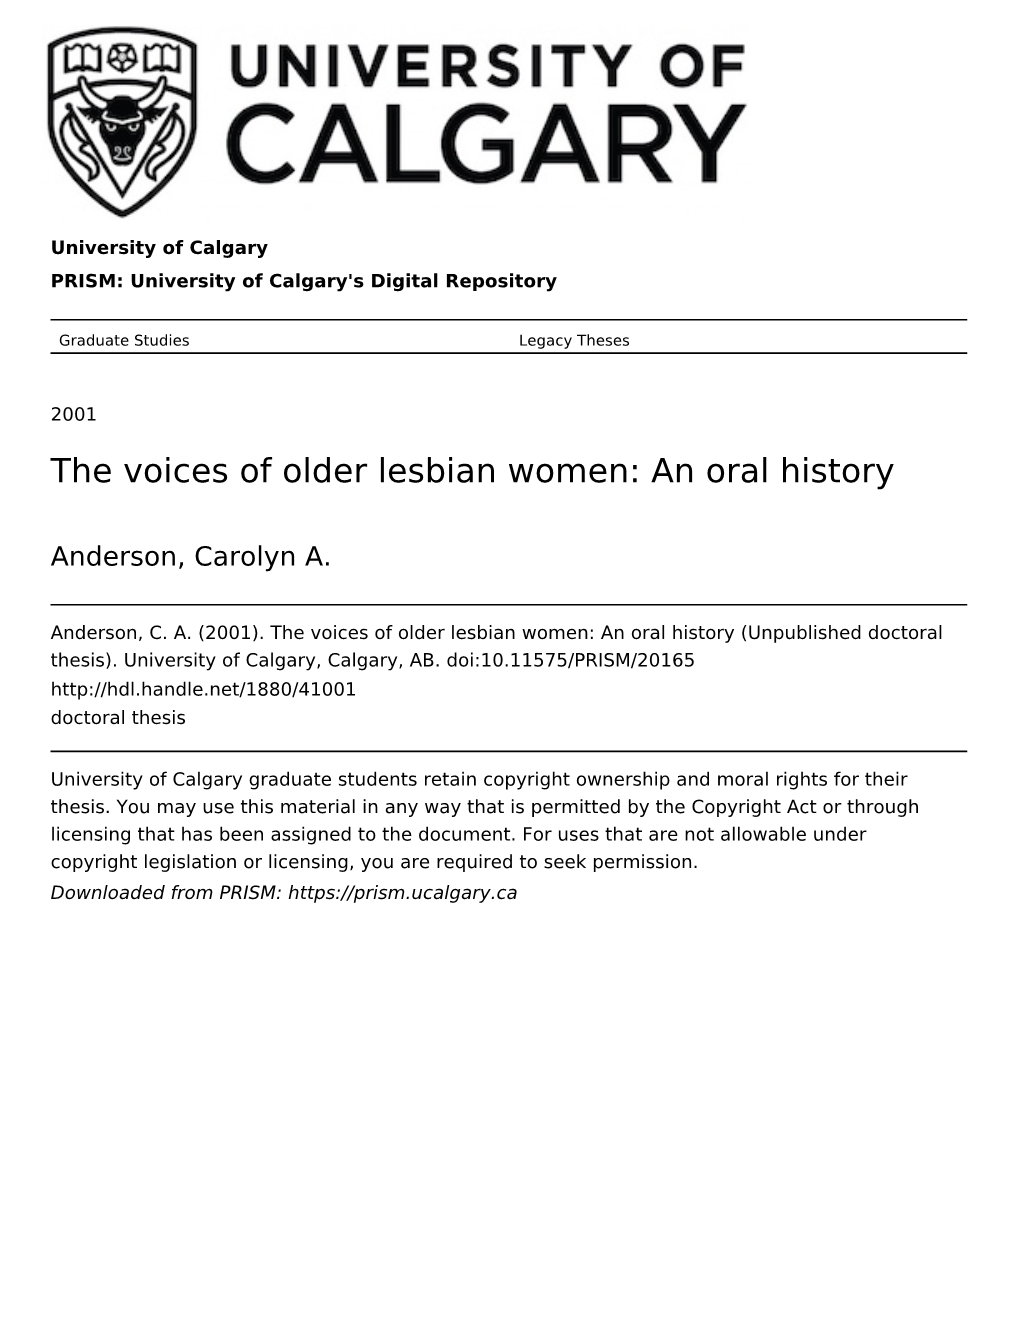 The Voices of Older Lesbian Women: an Oral History